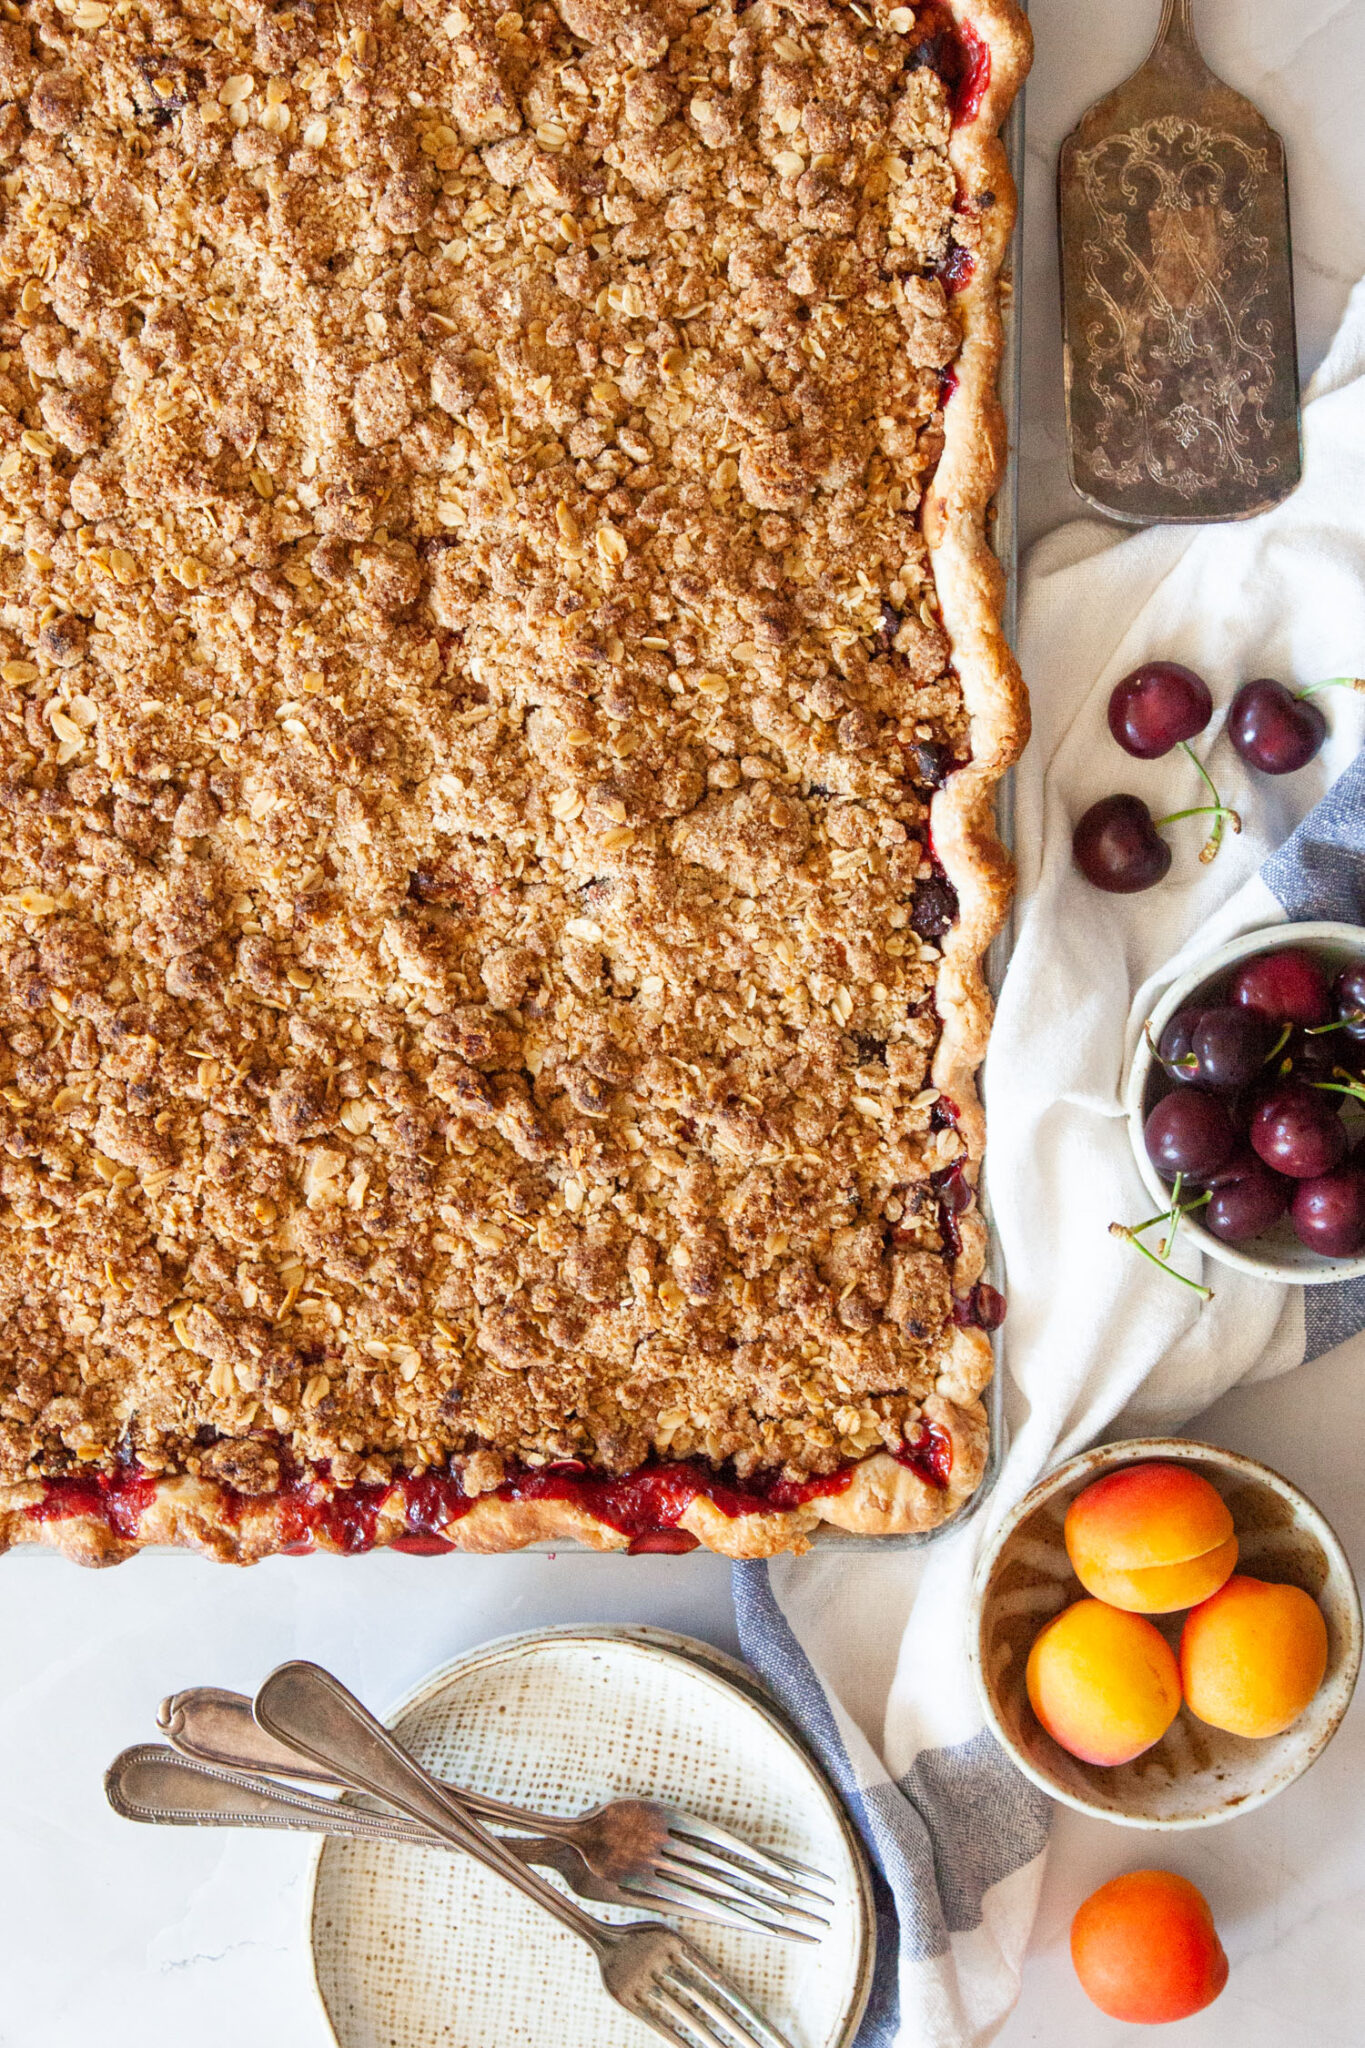 A large apricot and cherry slab pie with plates and fresh apricots and cherries next to it.